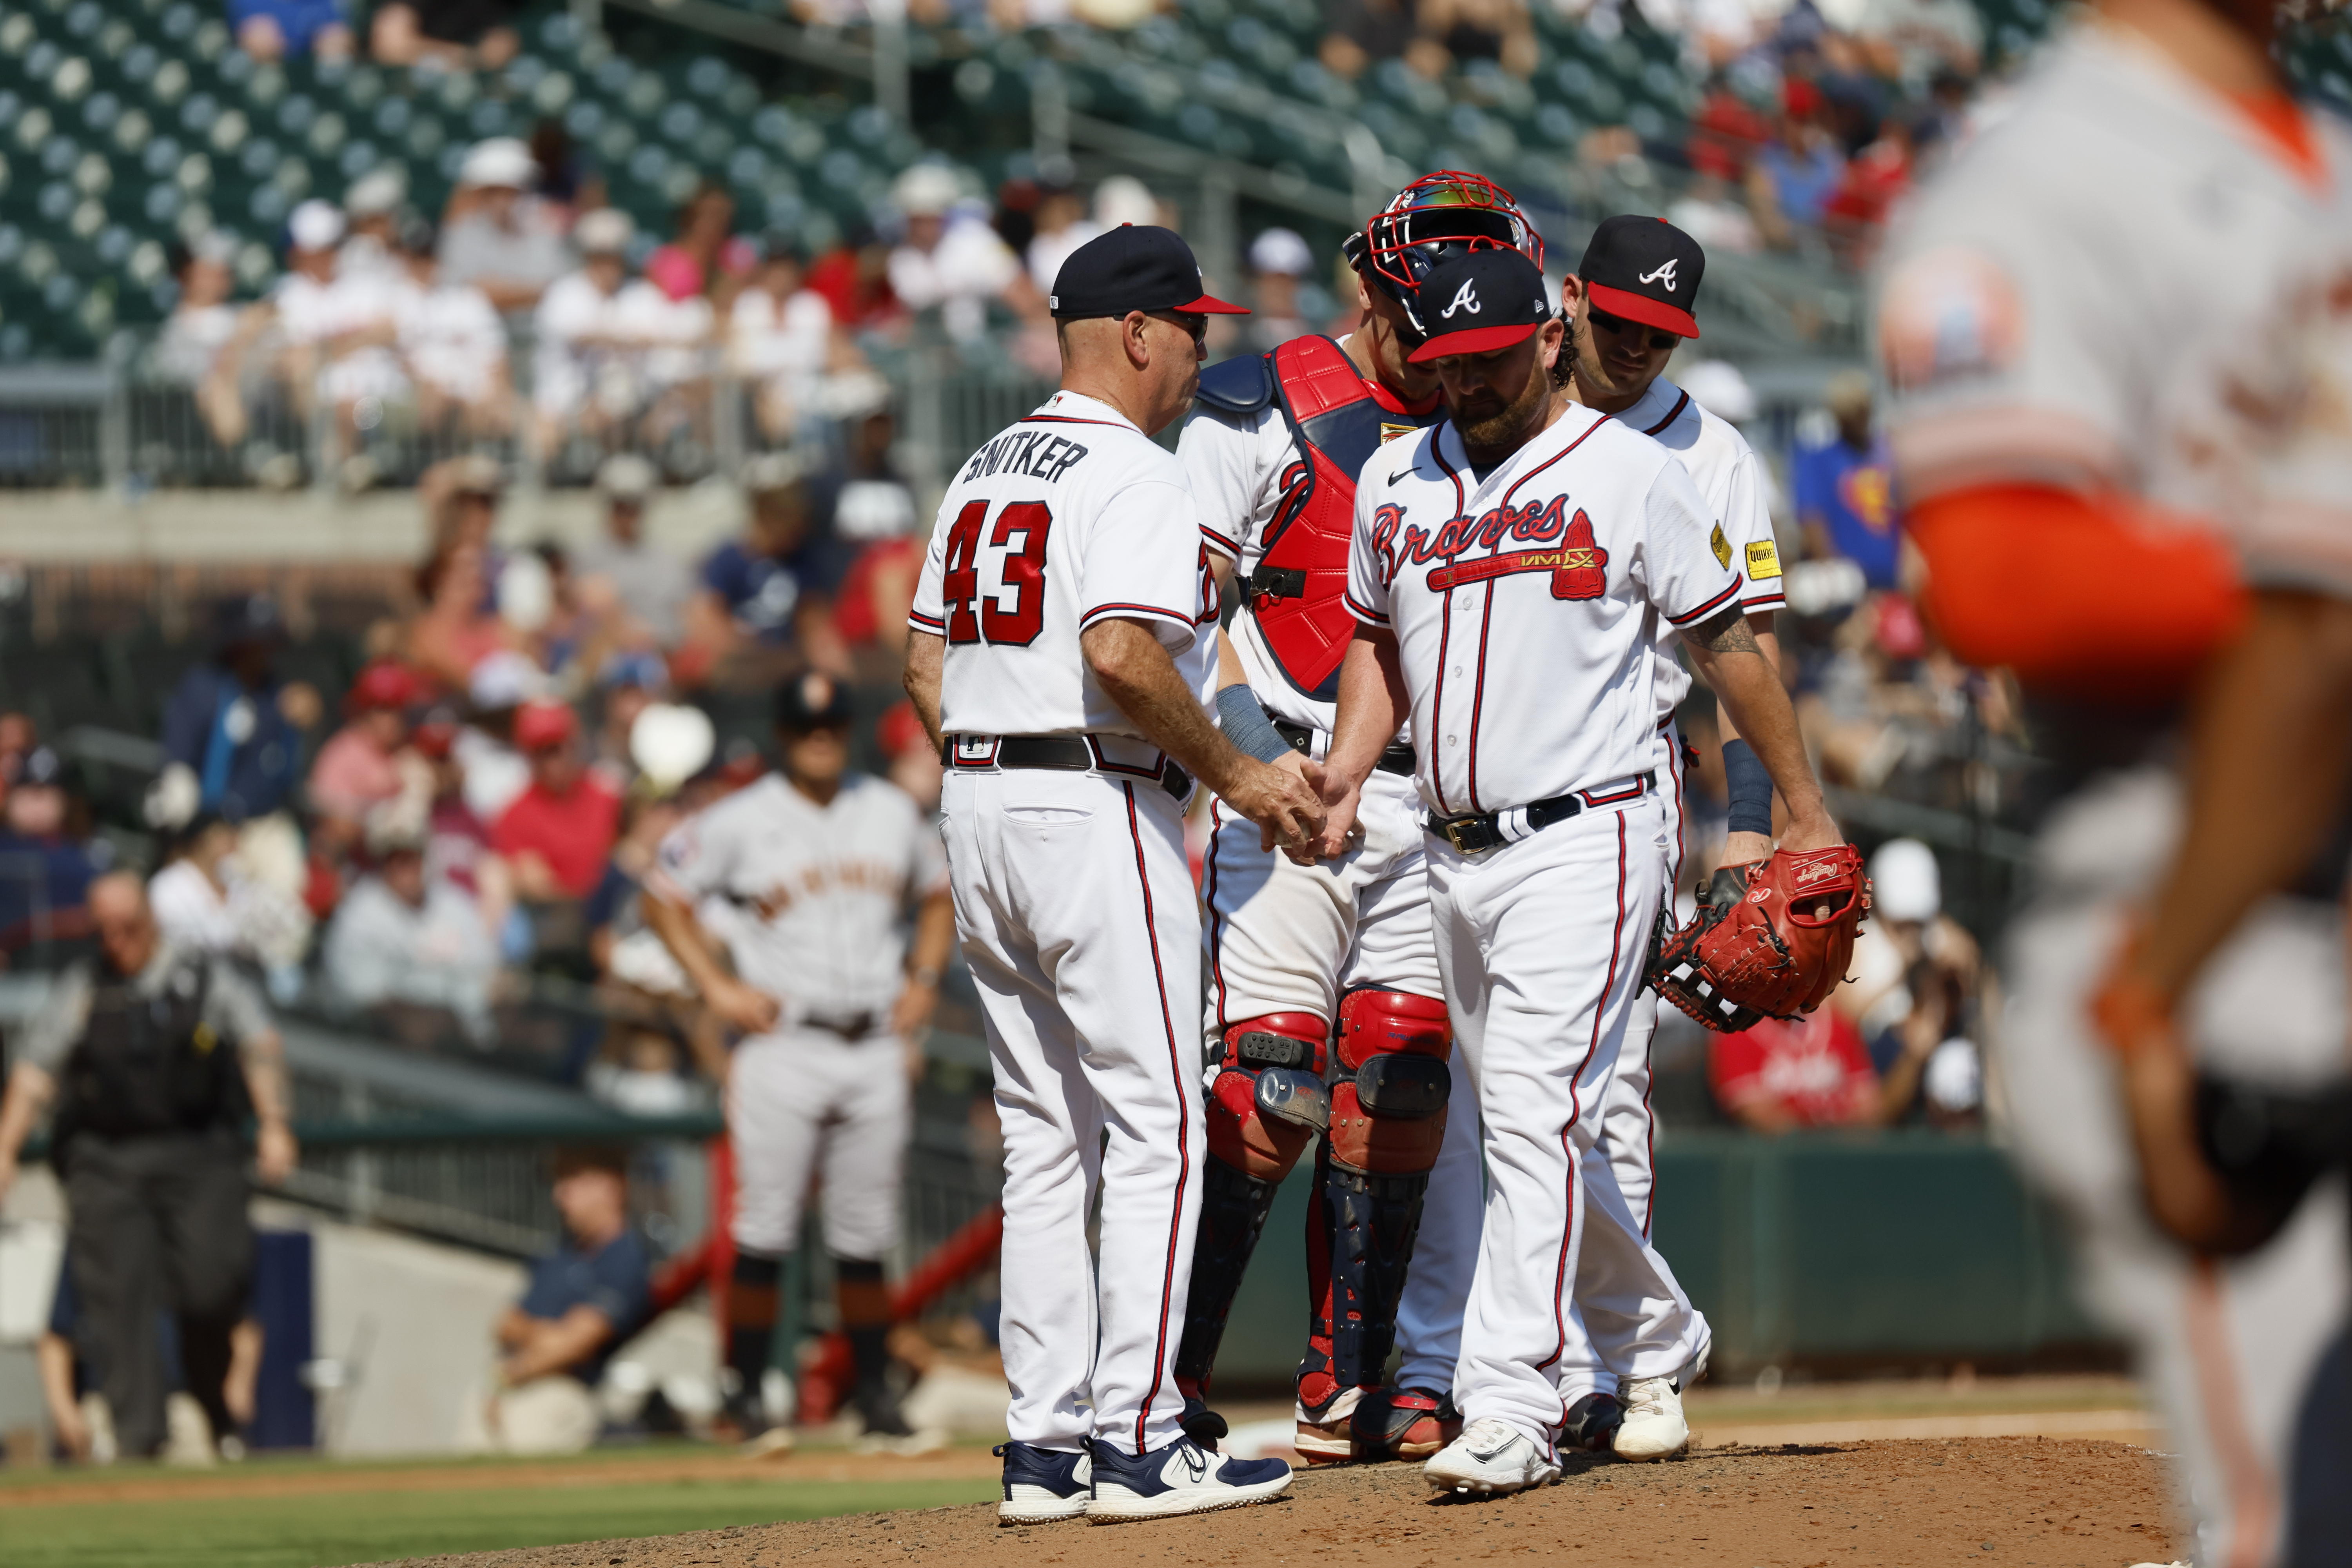 Photos: Braves fall short in series finale vs. Giants